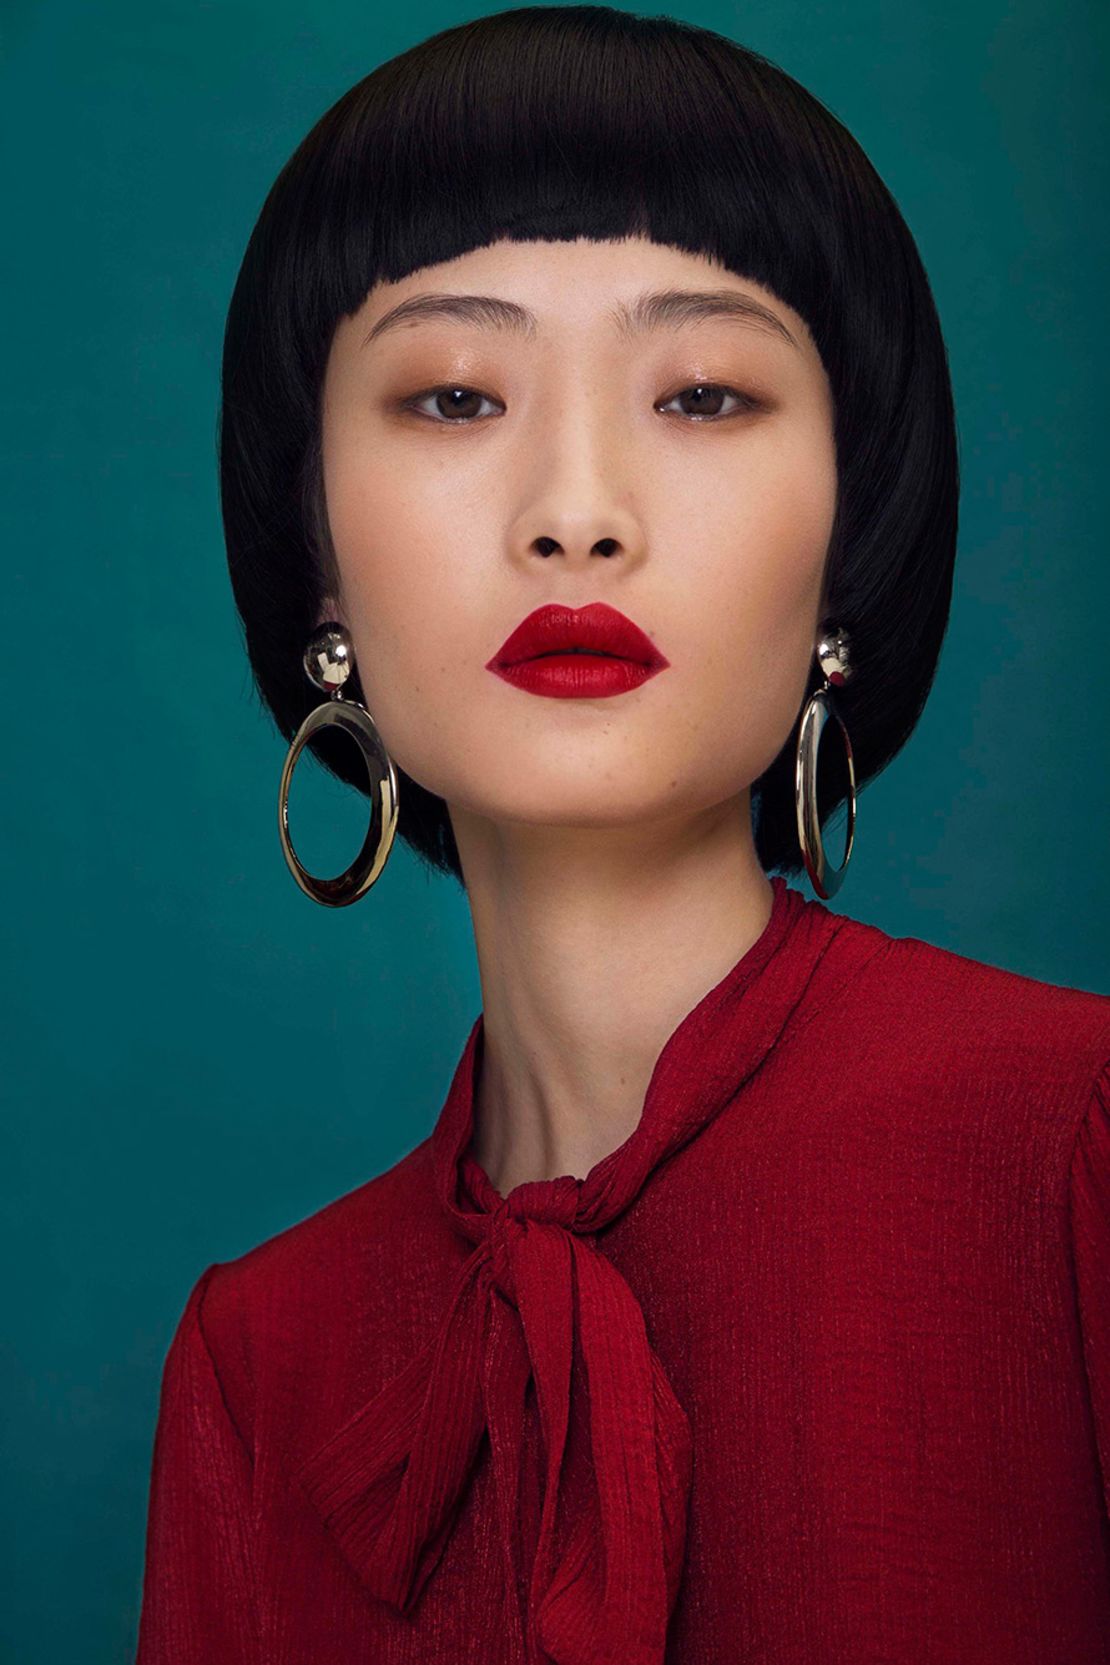 Zuo Ye is represented SMG Model Management and has appeared in numerous campaigns. 